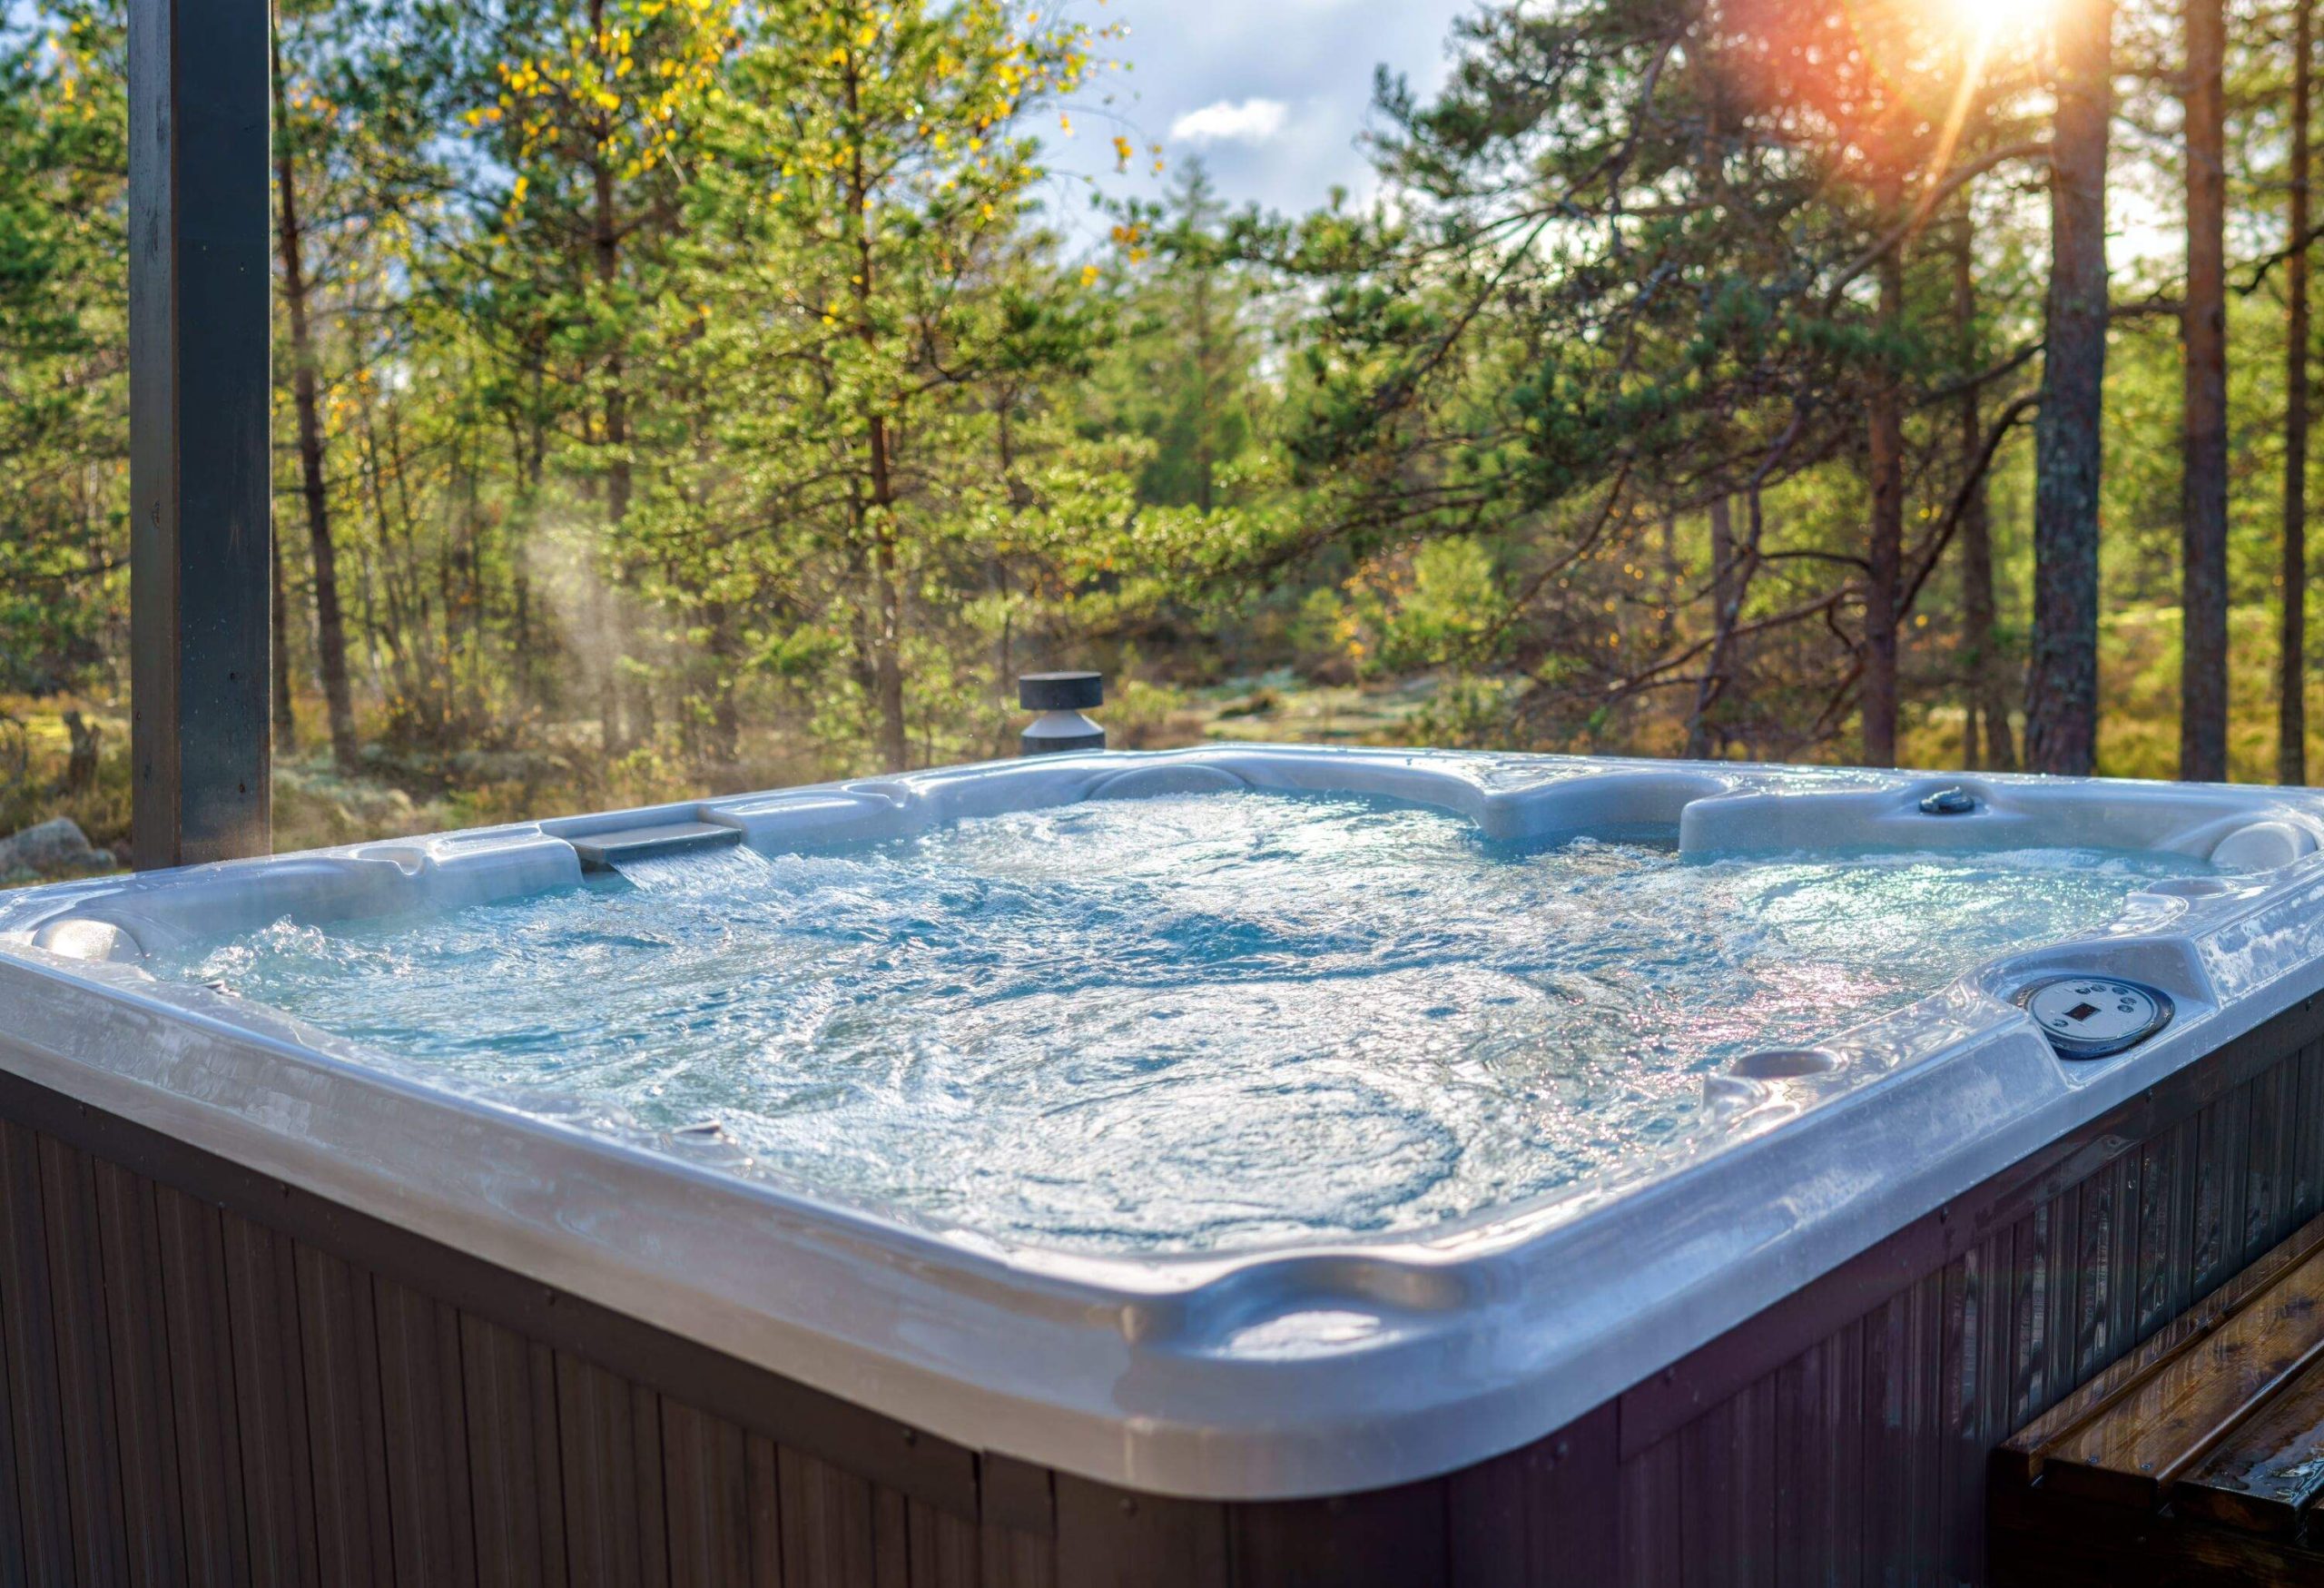 A warm hot tub in a beautiful forest landscape at sunset. You can relax outdoors in nature while enjoying the warmth of the hot tub.